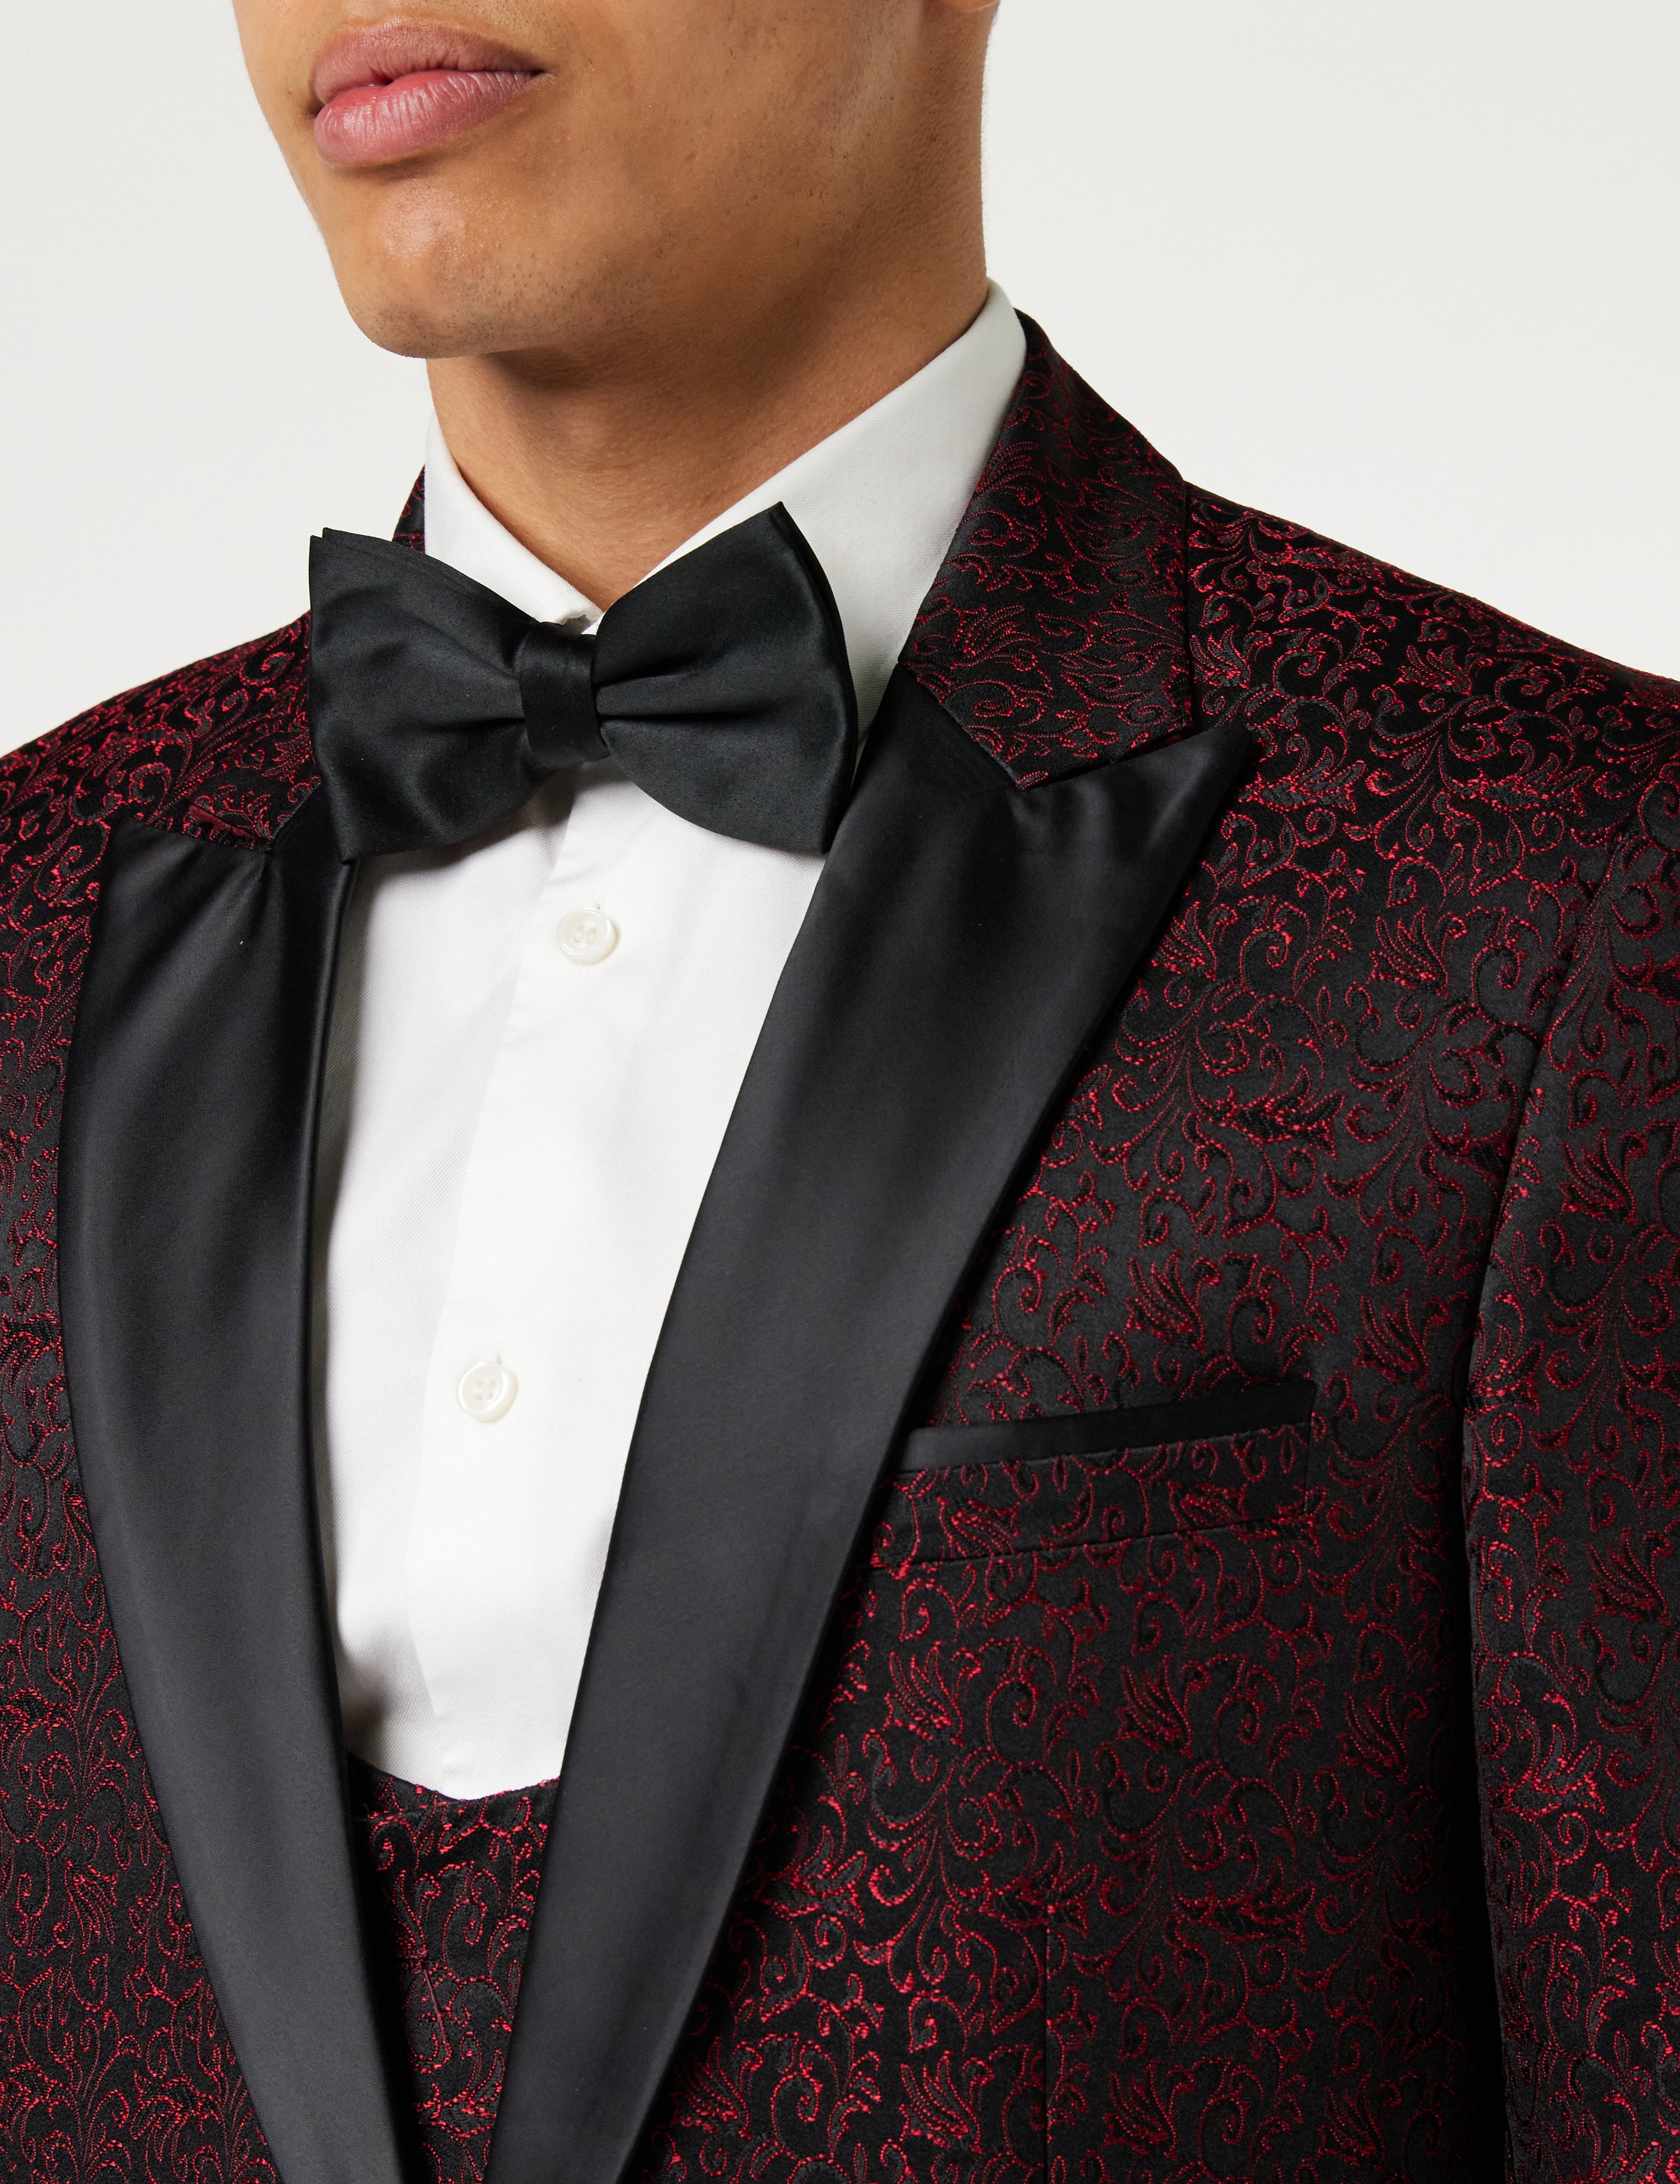 BRIAN - Floral Jacquard Print Red Tuxedo Jacket With Waistcoat